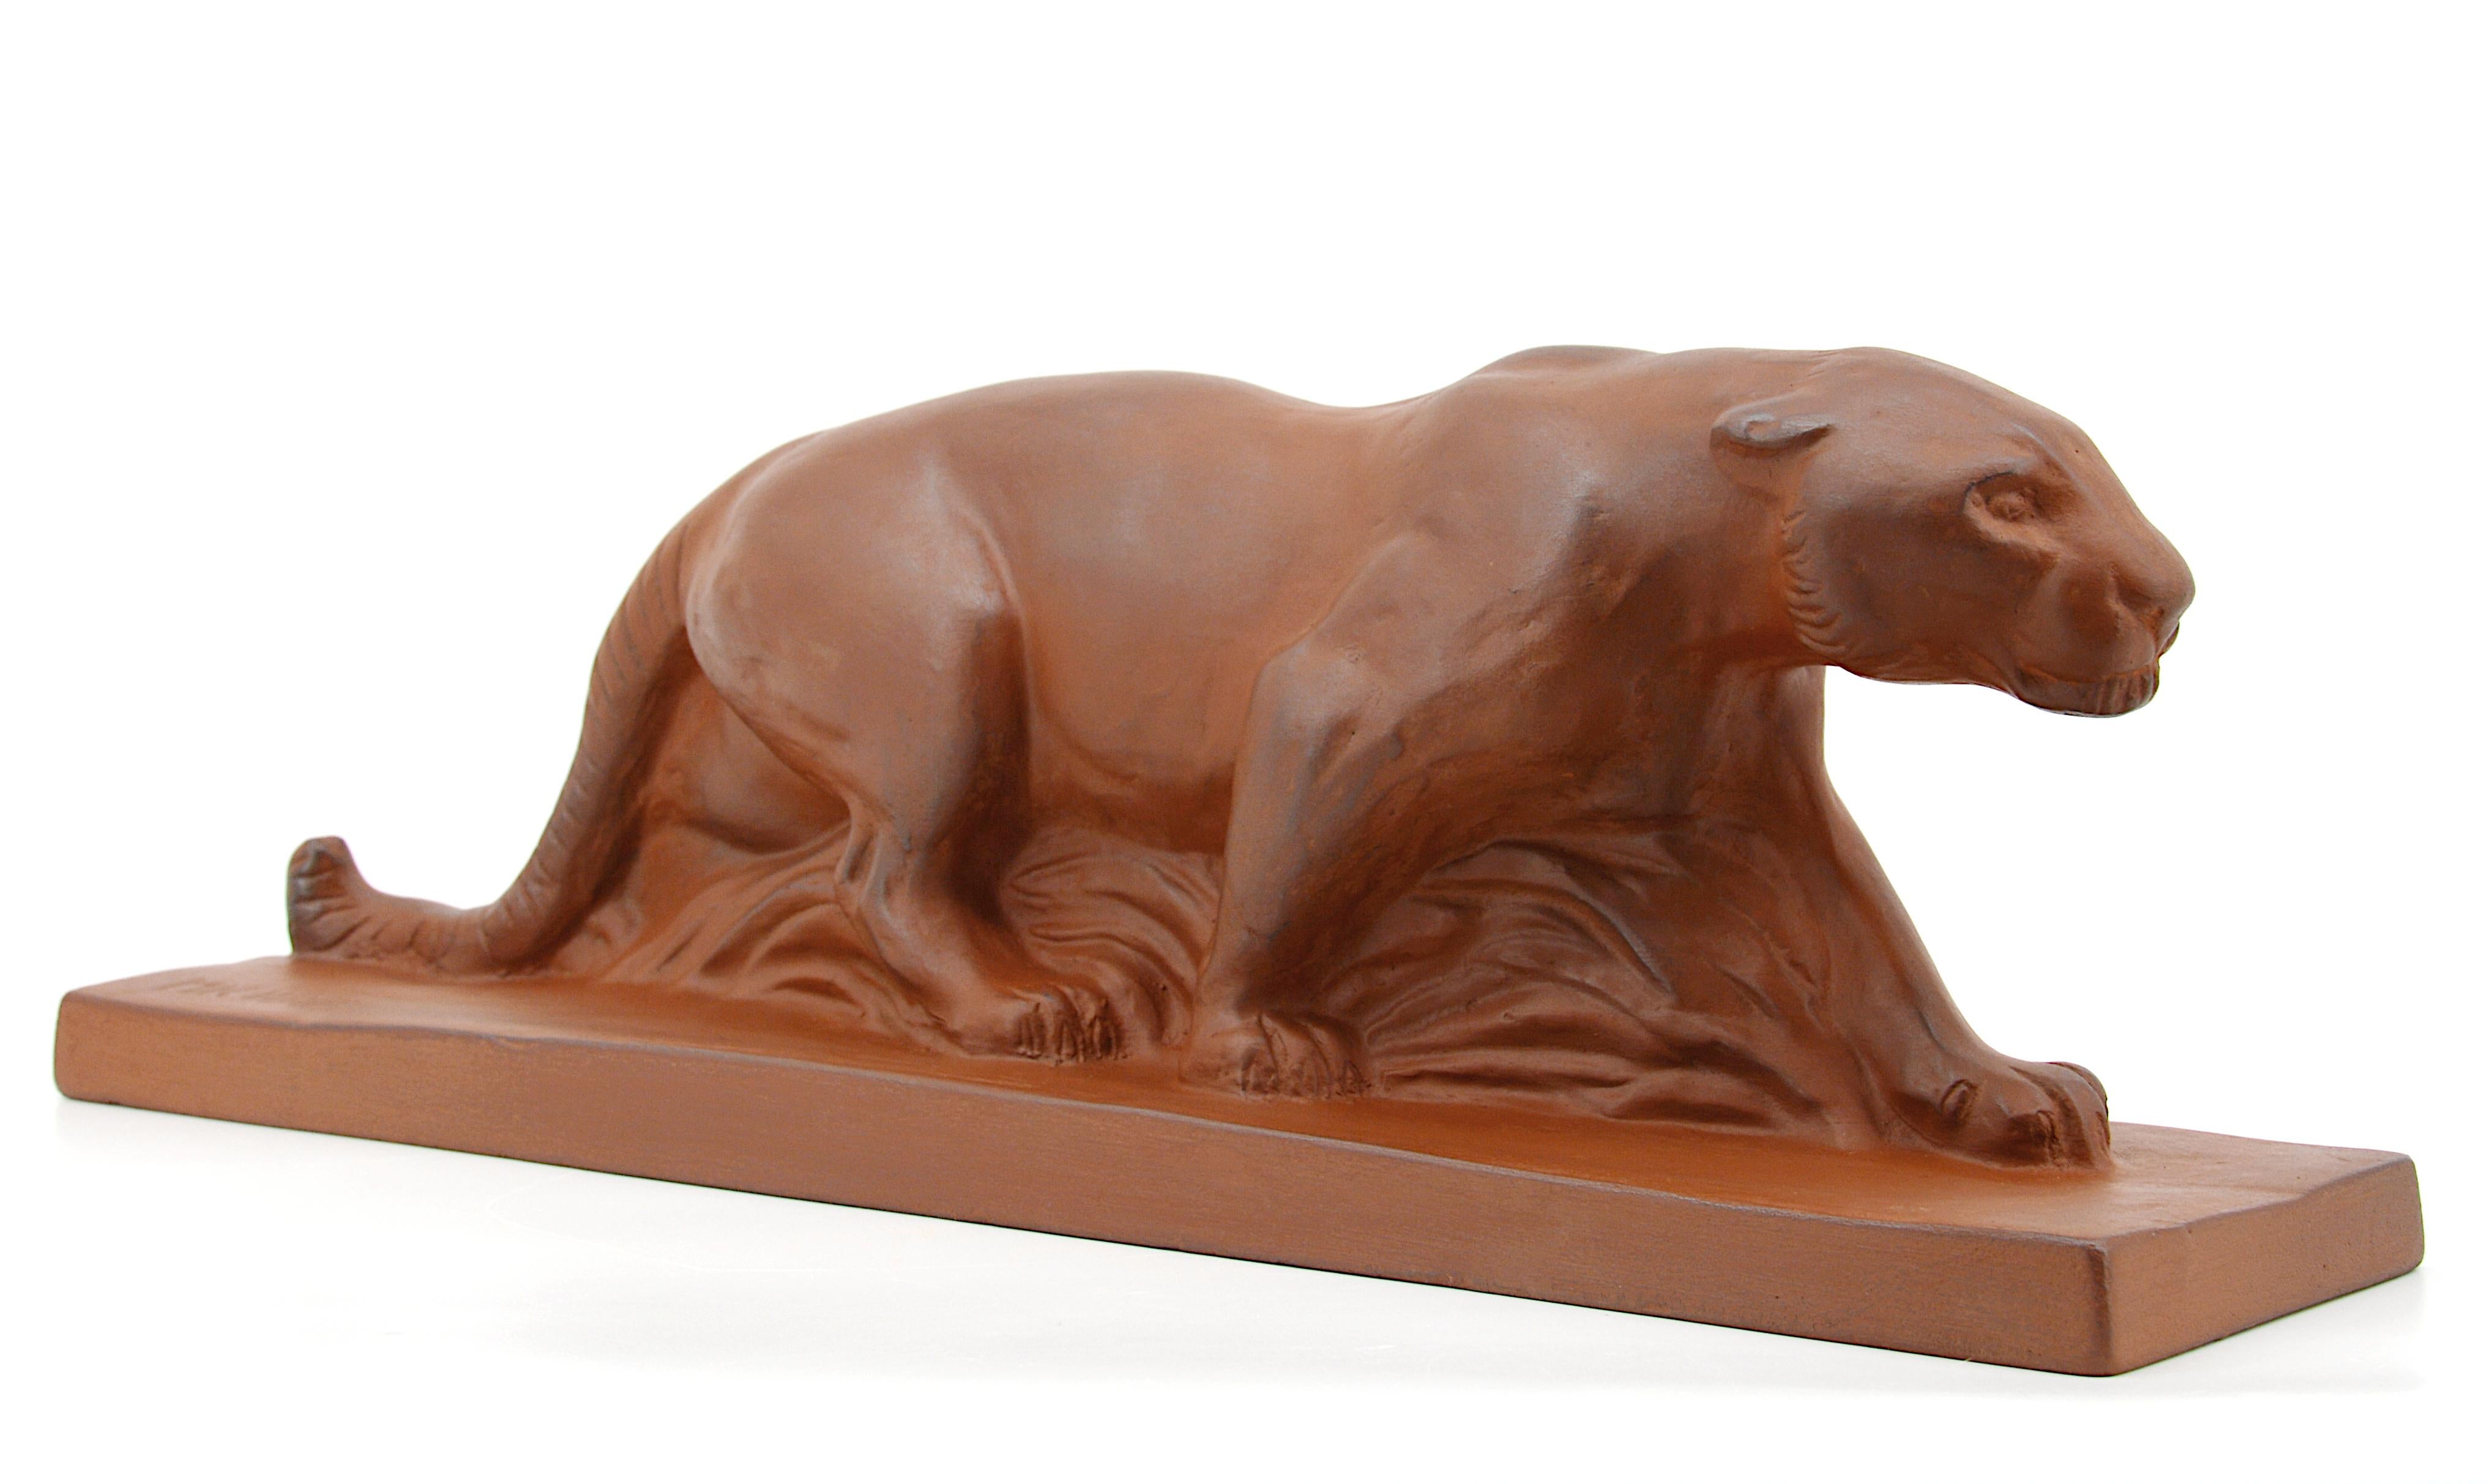 French Art Deco Terracotta Lioness Sculpture by Michael, 1930s For Sale 2